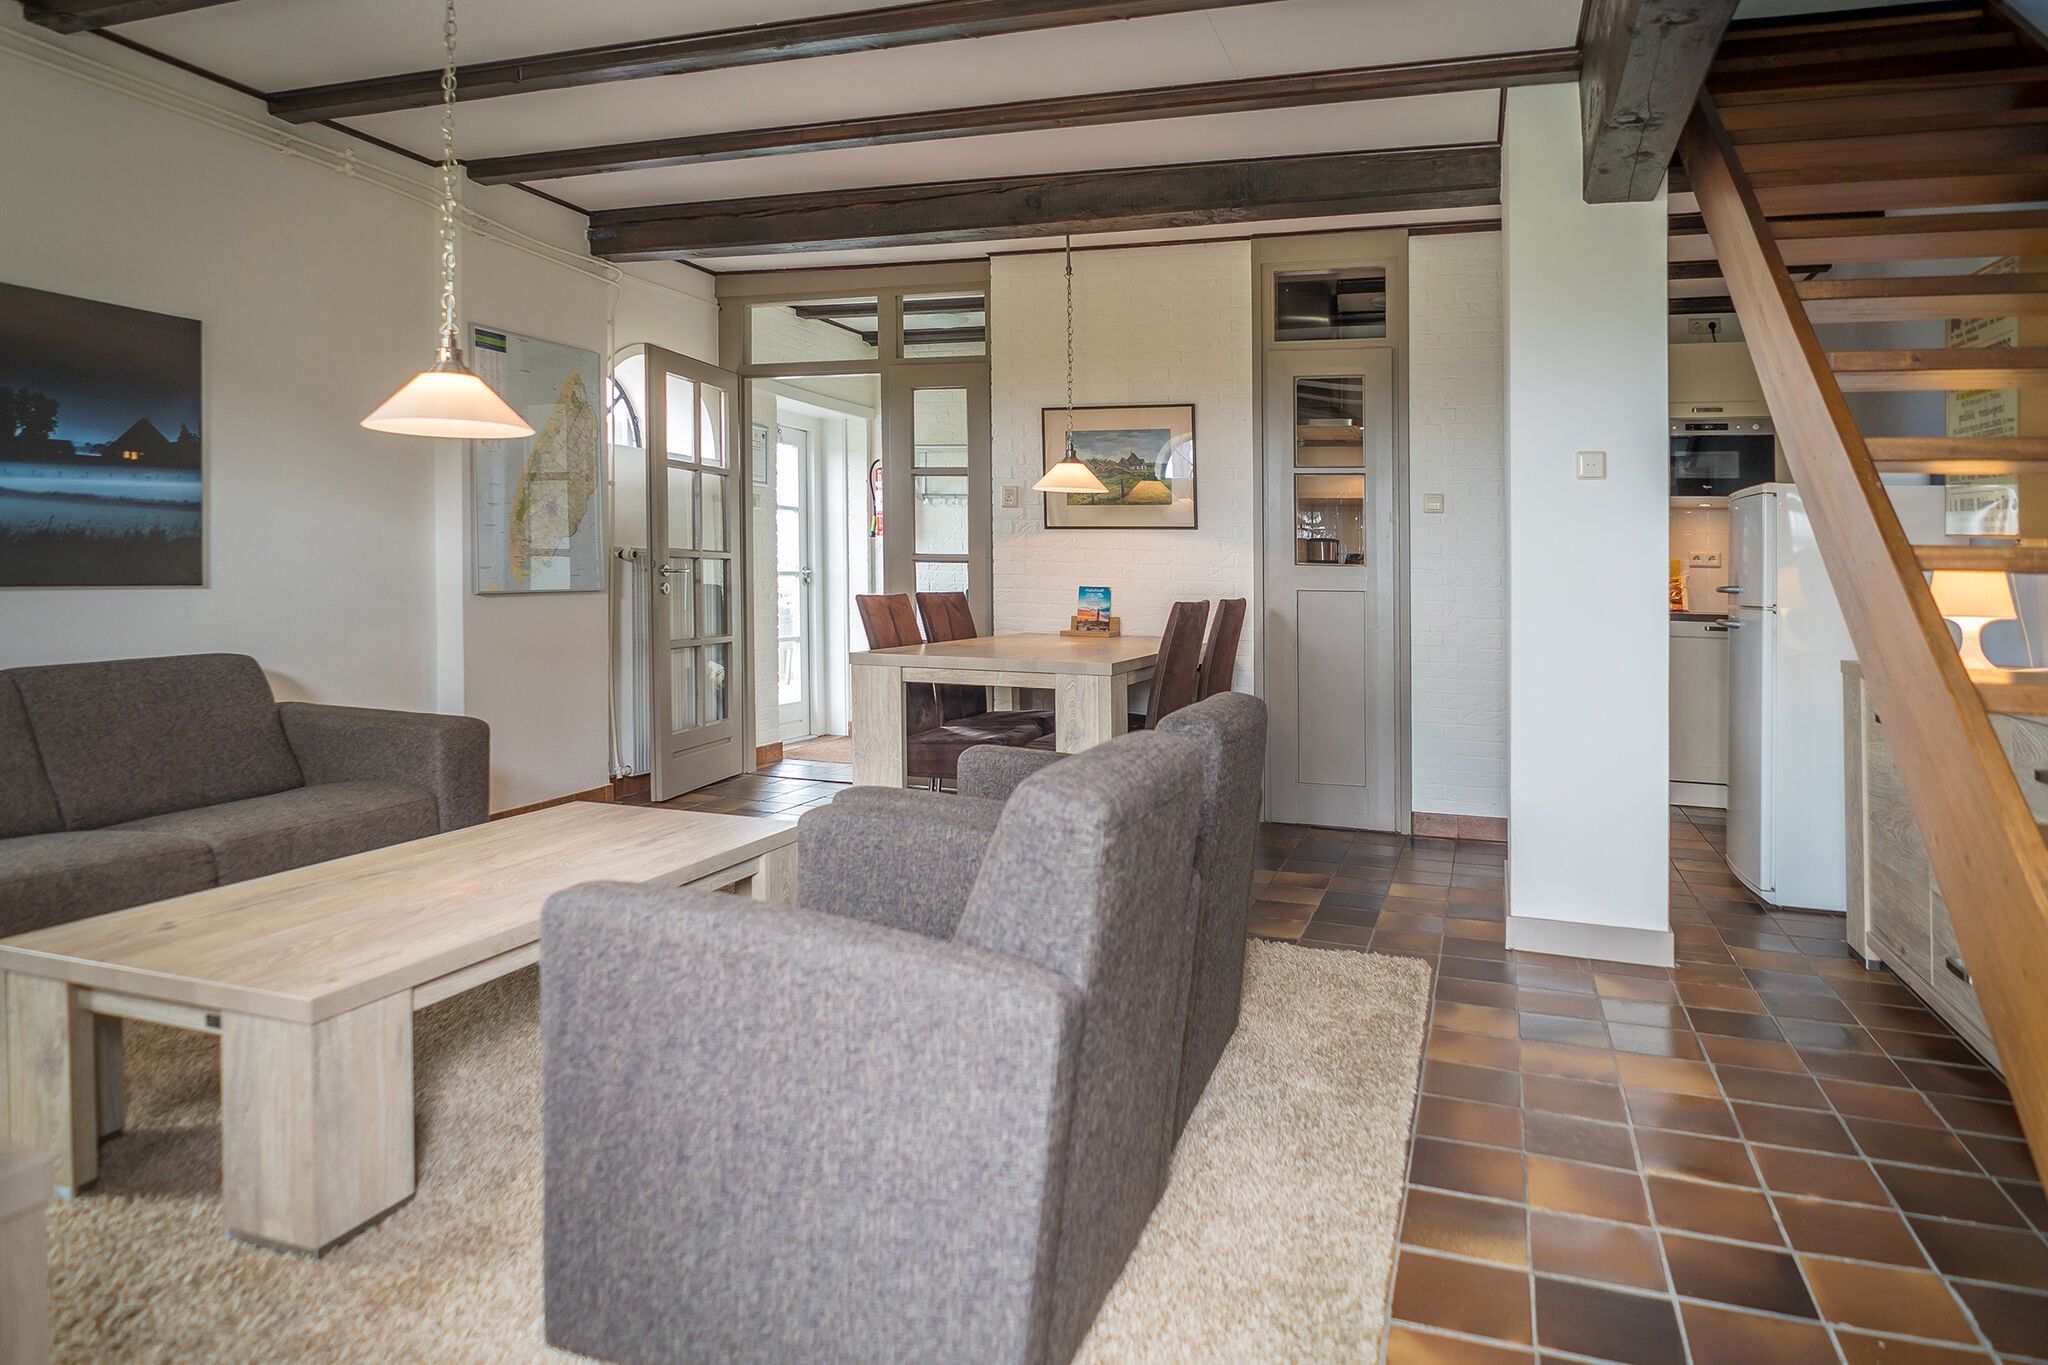 Apartment in farmhouse on the island of Texel